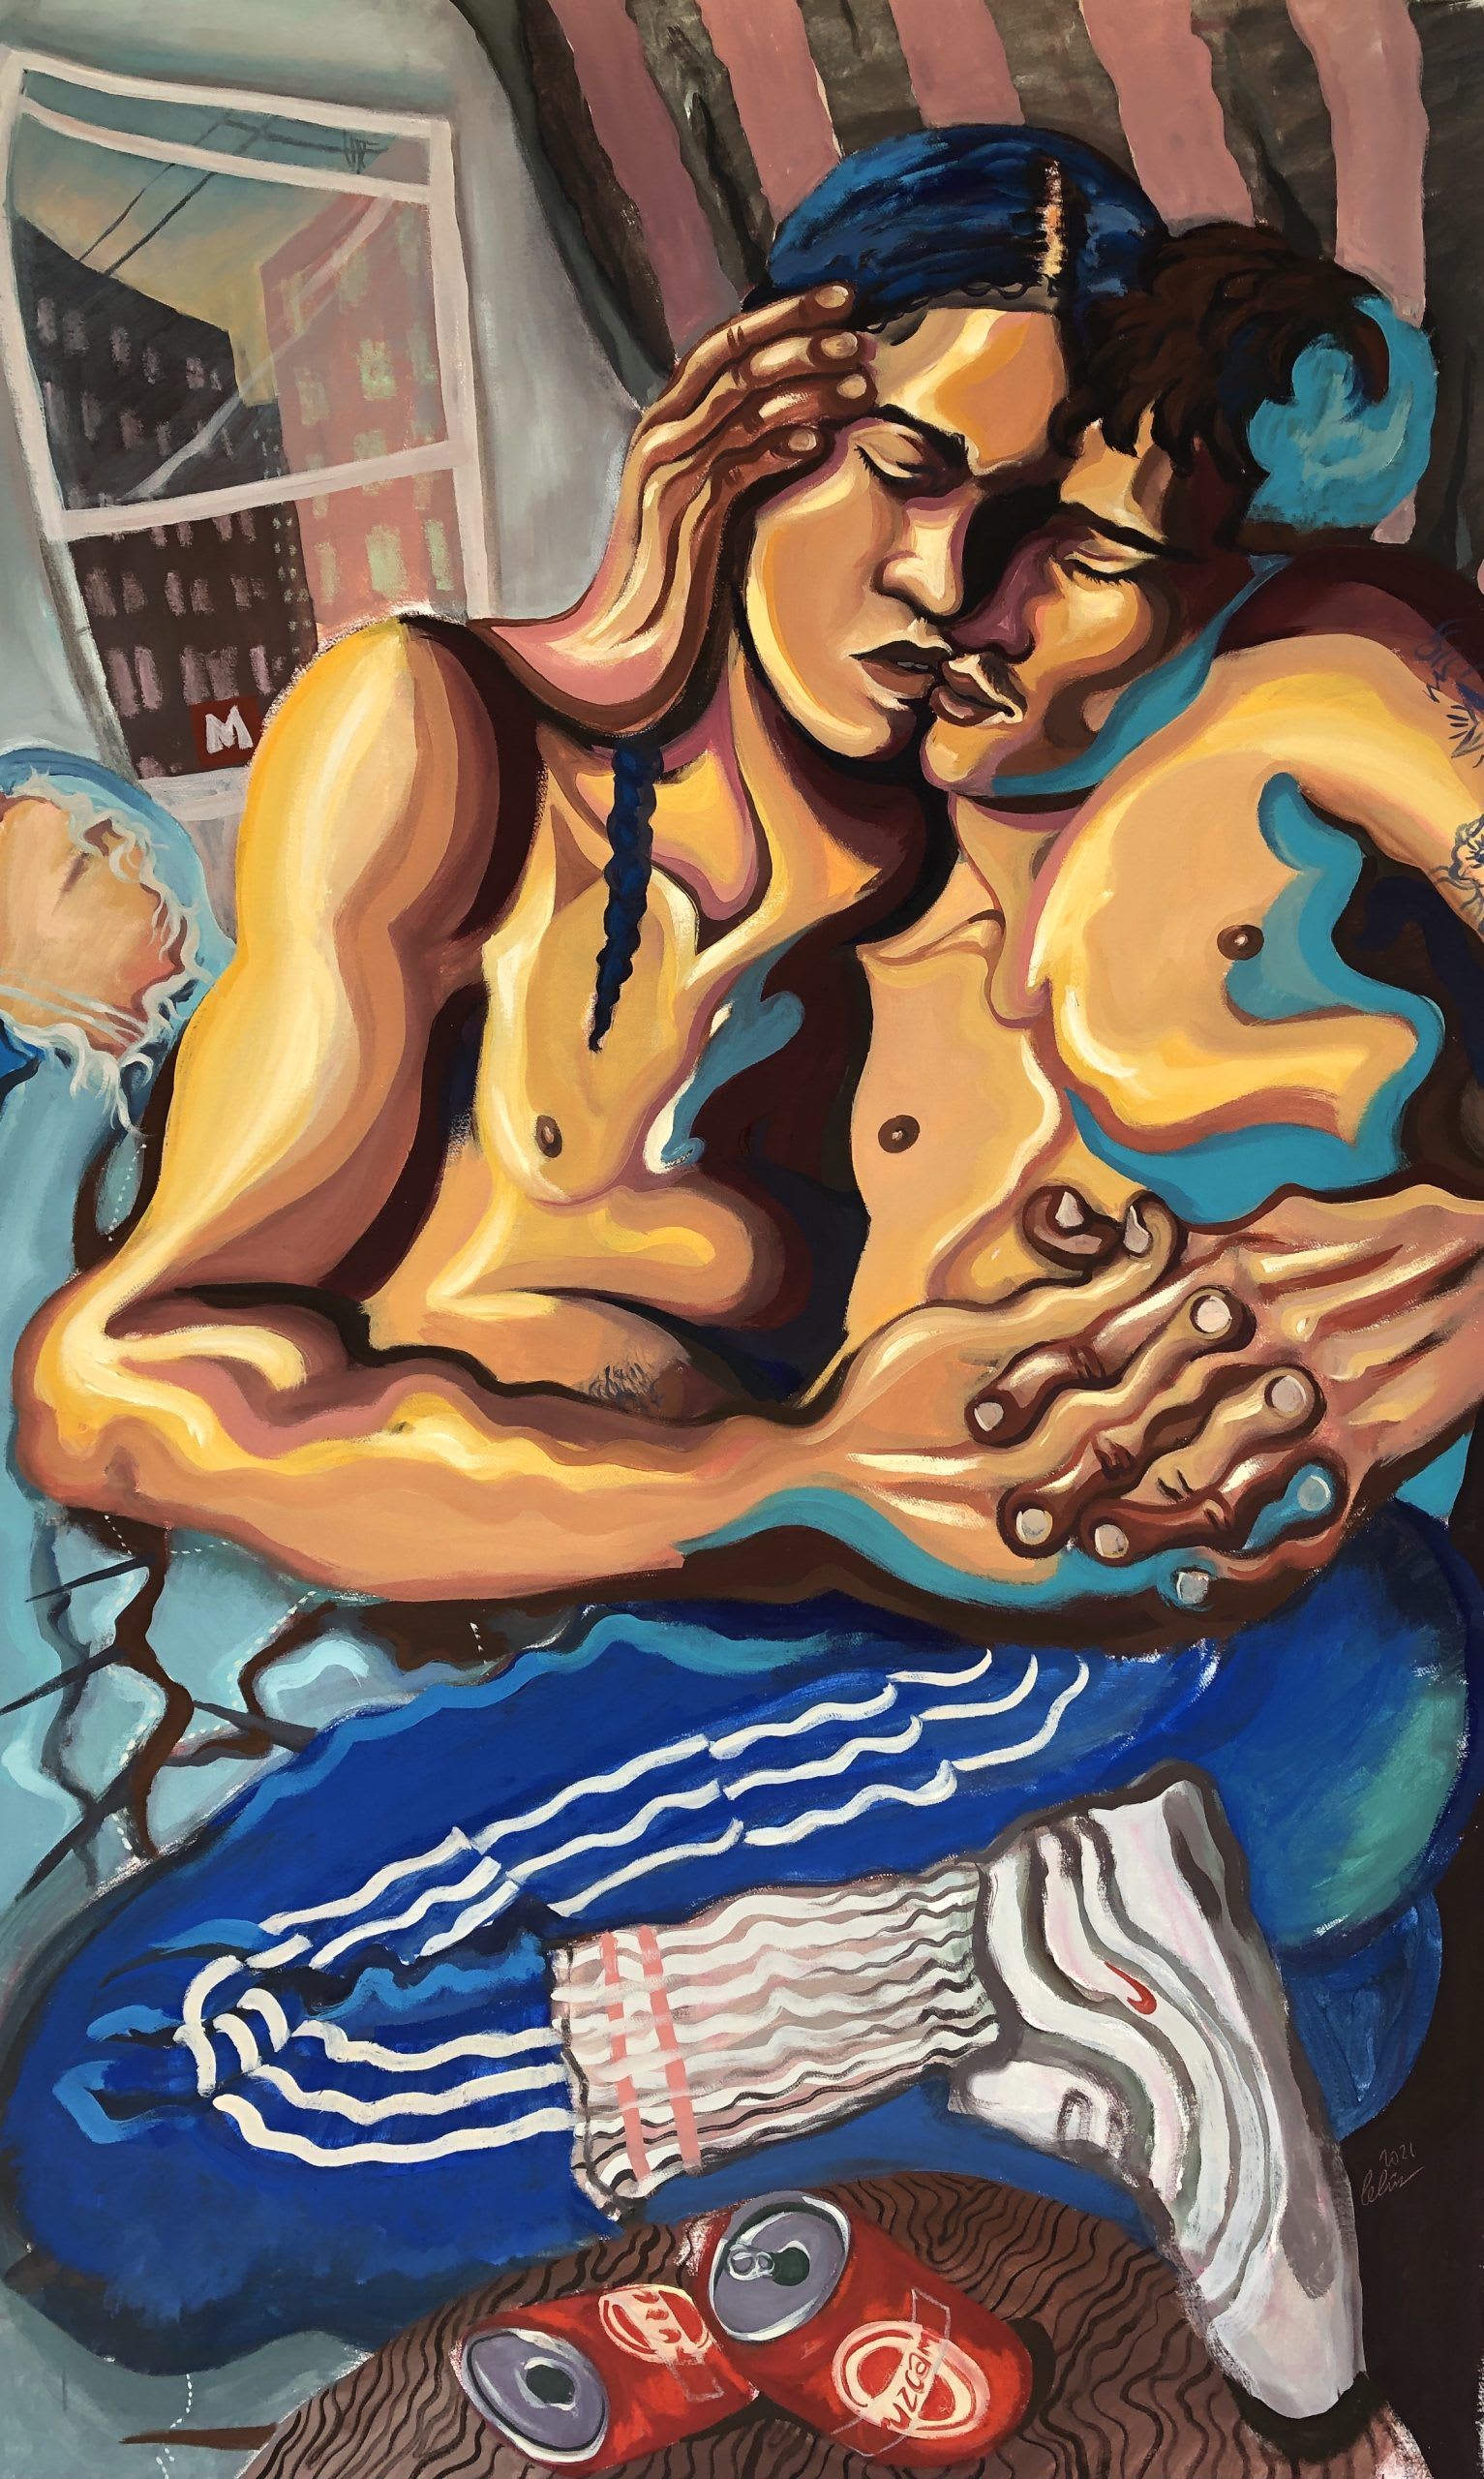 'Queer Intimacy' London exhibition image of two lovers embracing